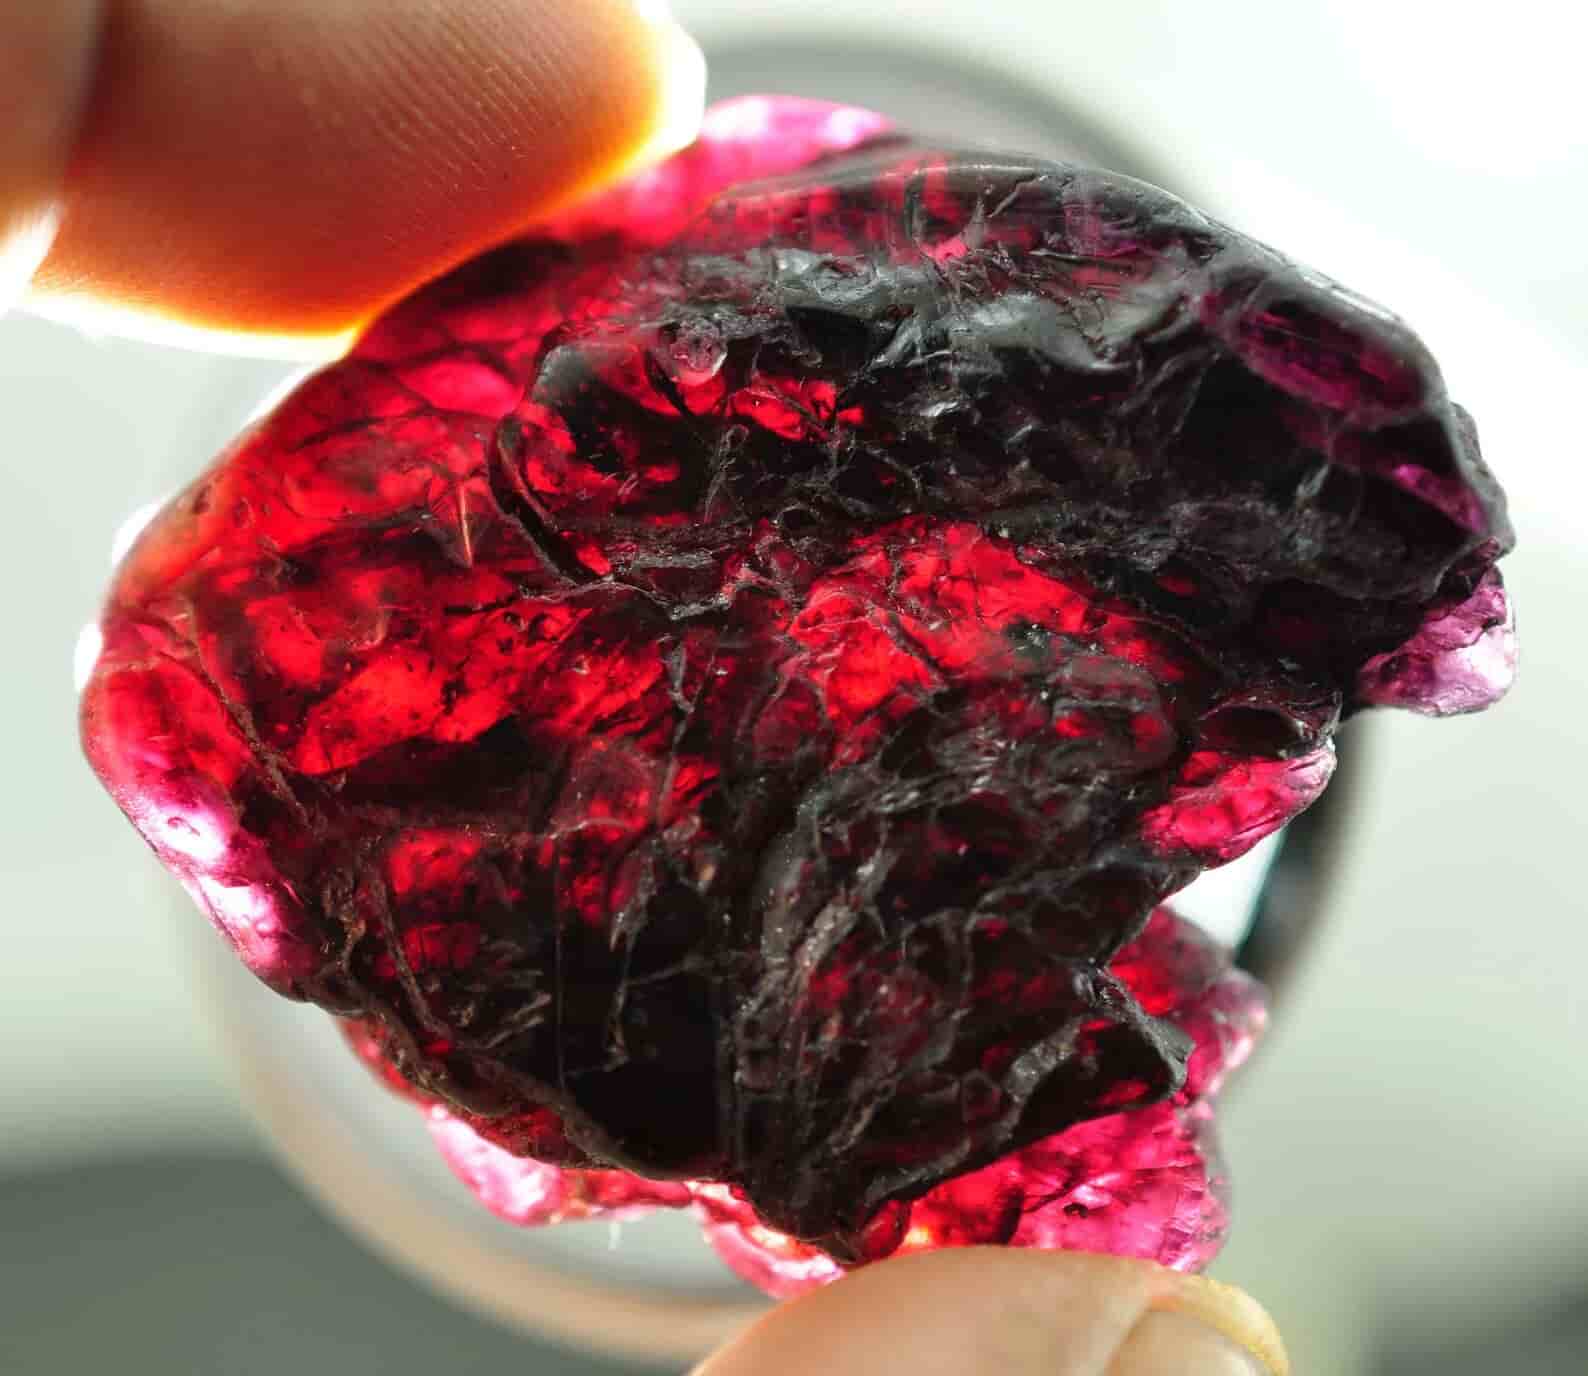 Top 10 World's Rarest & Most Valuable Gems - Geology In